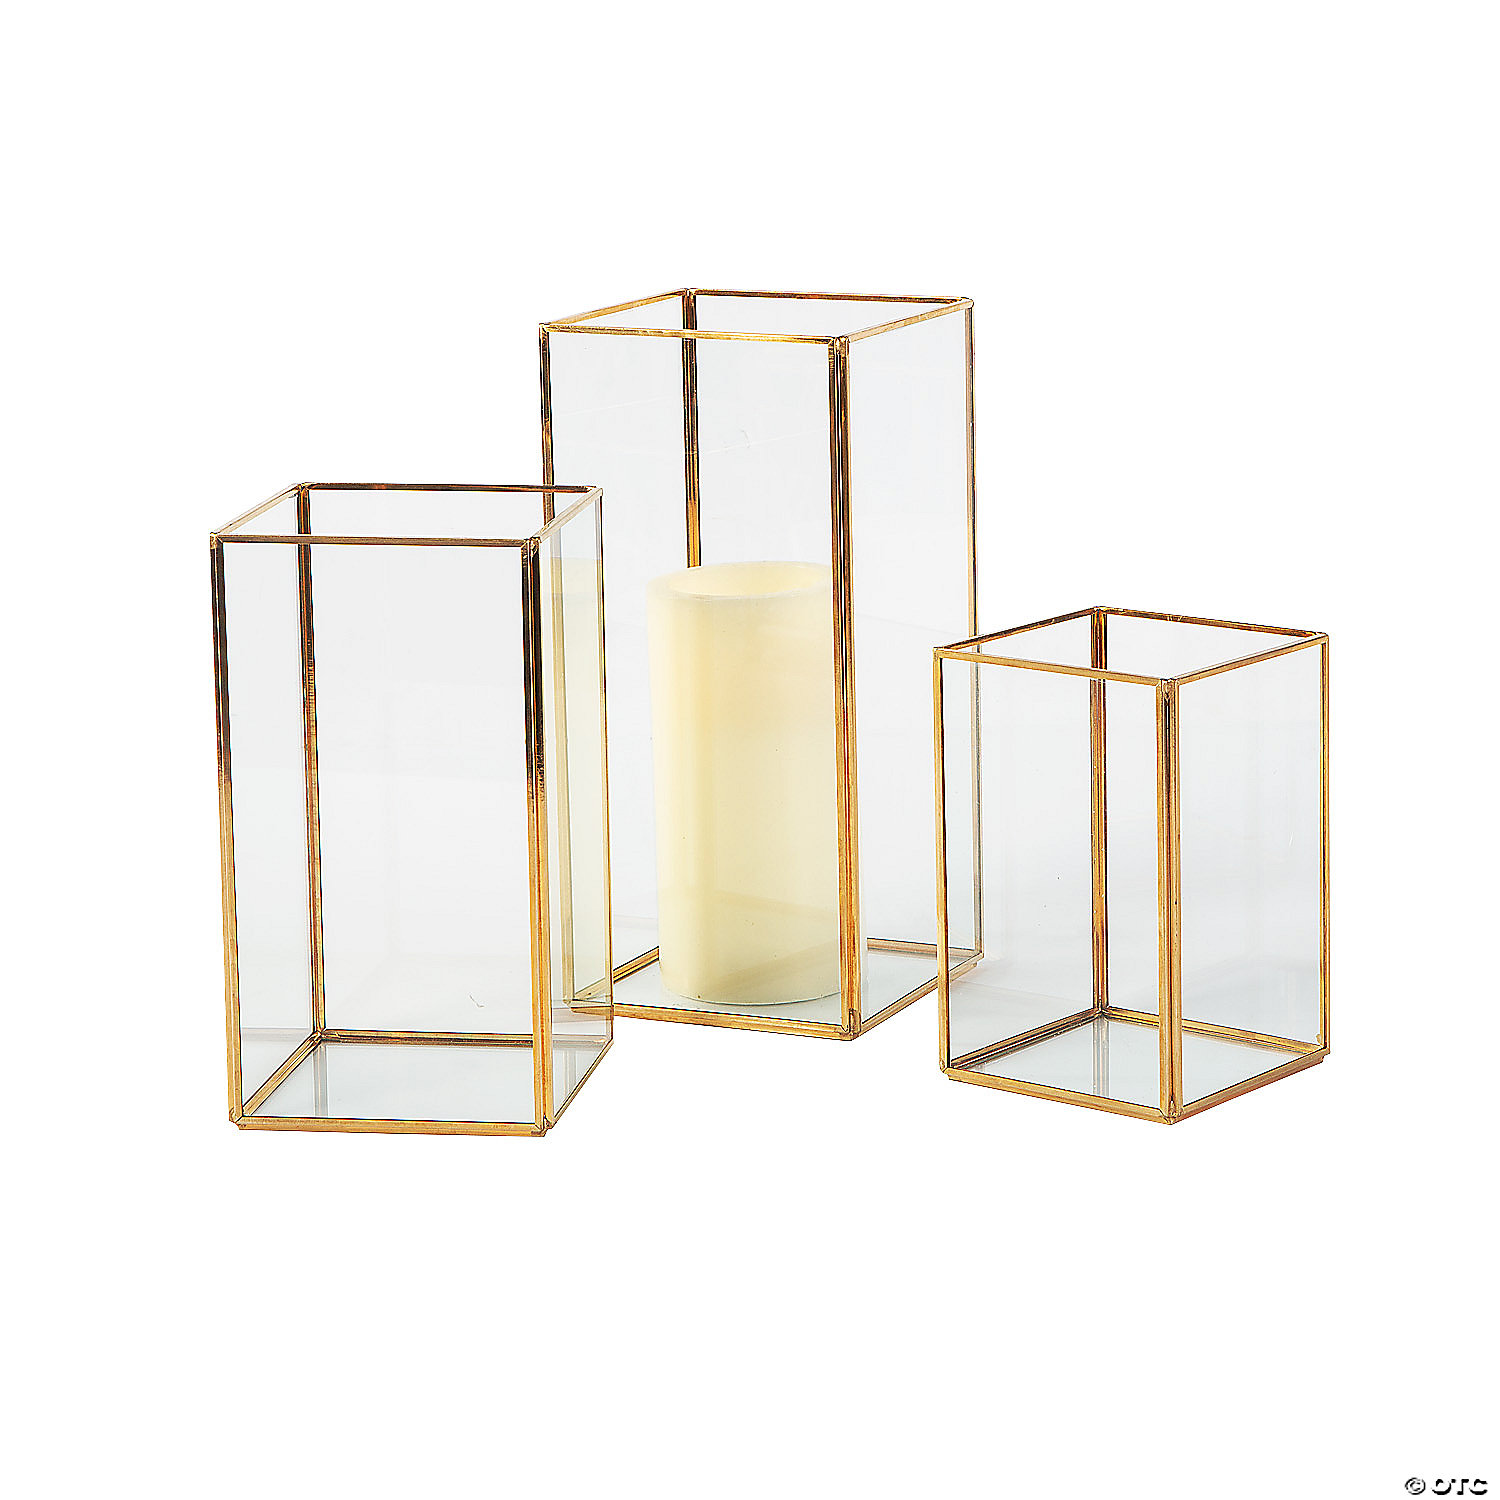 This set of 3 gold geometric square candle holders is perfect for wedding and event decoration. They are made of durable metal material and feature a sleek geometric design. These candle holders are perfect for lighting candles for a romantic and elegant ambiance. They can also be used to display flowers or other decorations. This set of candle holders is functional and easy to use. They coordinate with any decor style and are the perfect addition to any occasion.